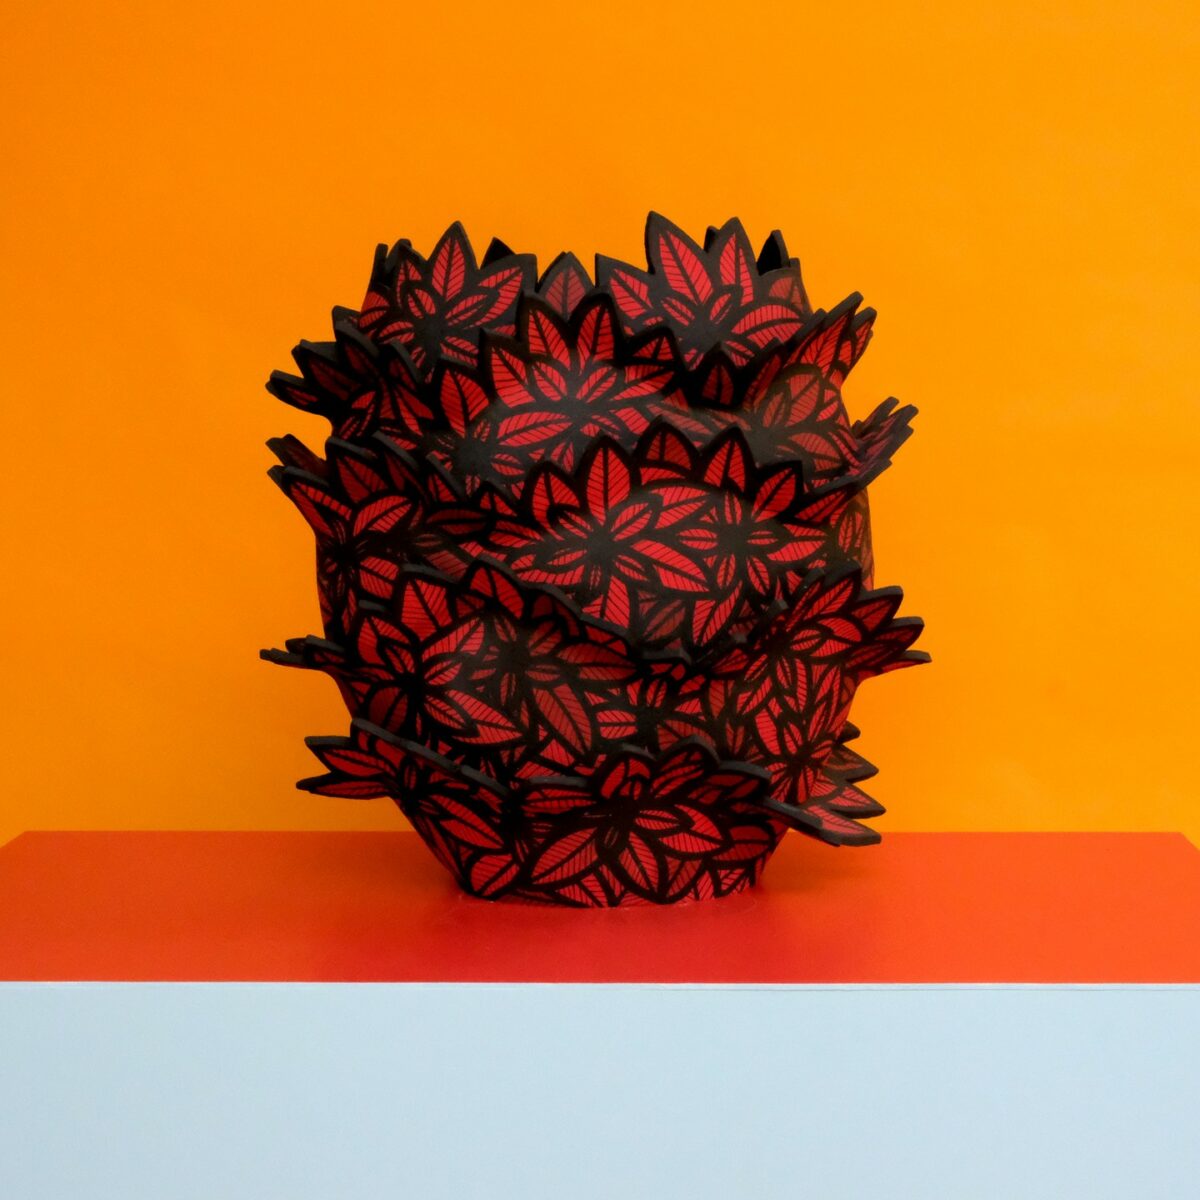 Vibrant Art Pieces That Fuse Ceramics With Drawings By Ariana Heinzman 9